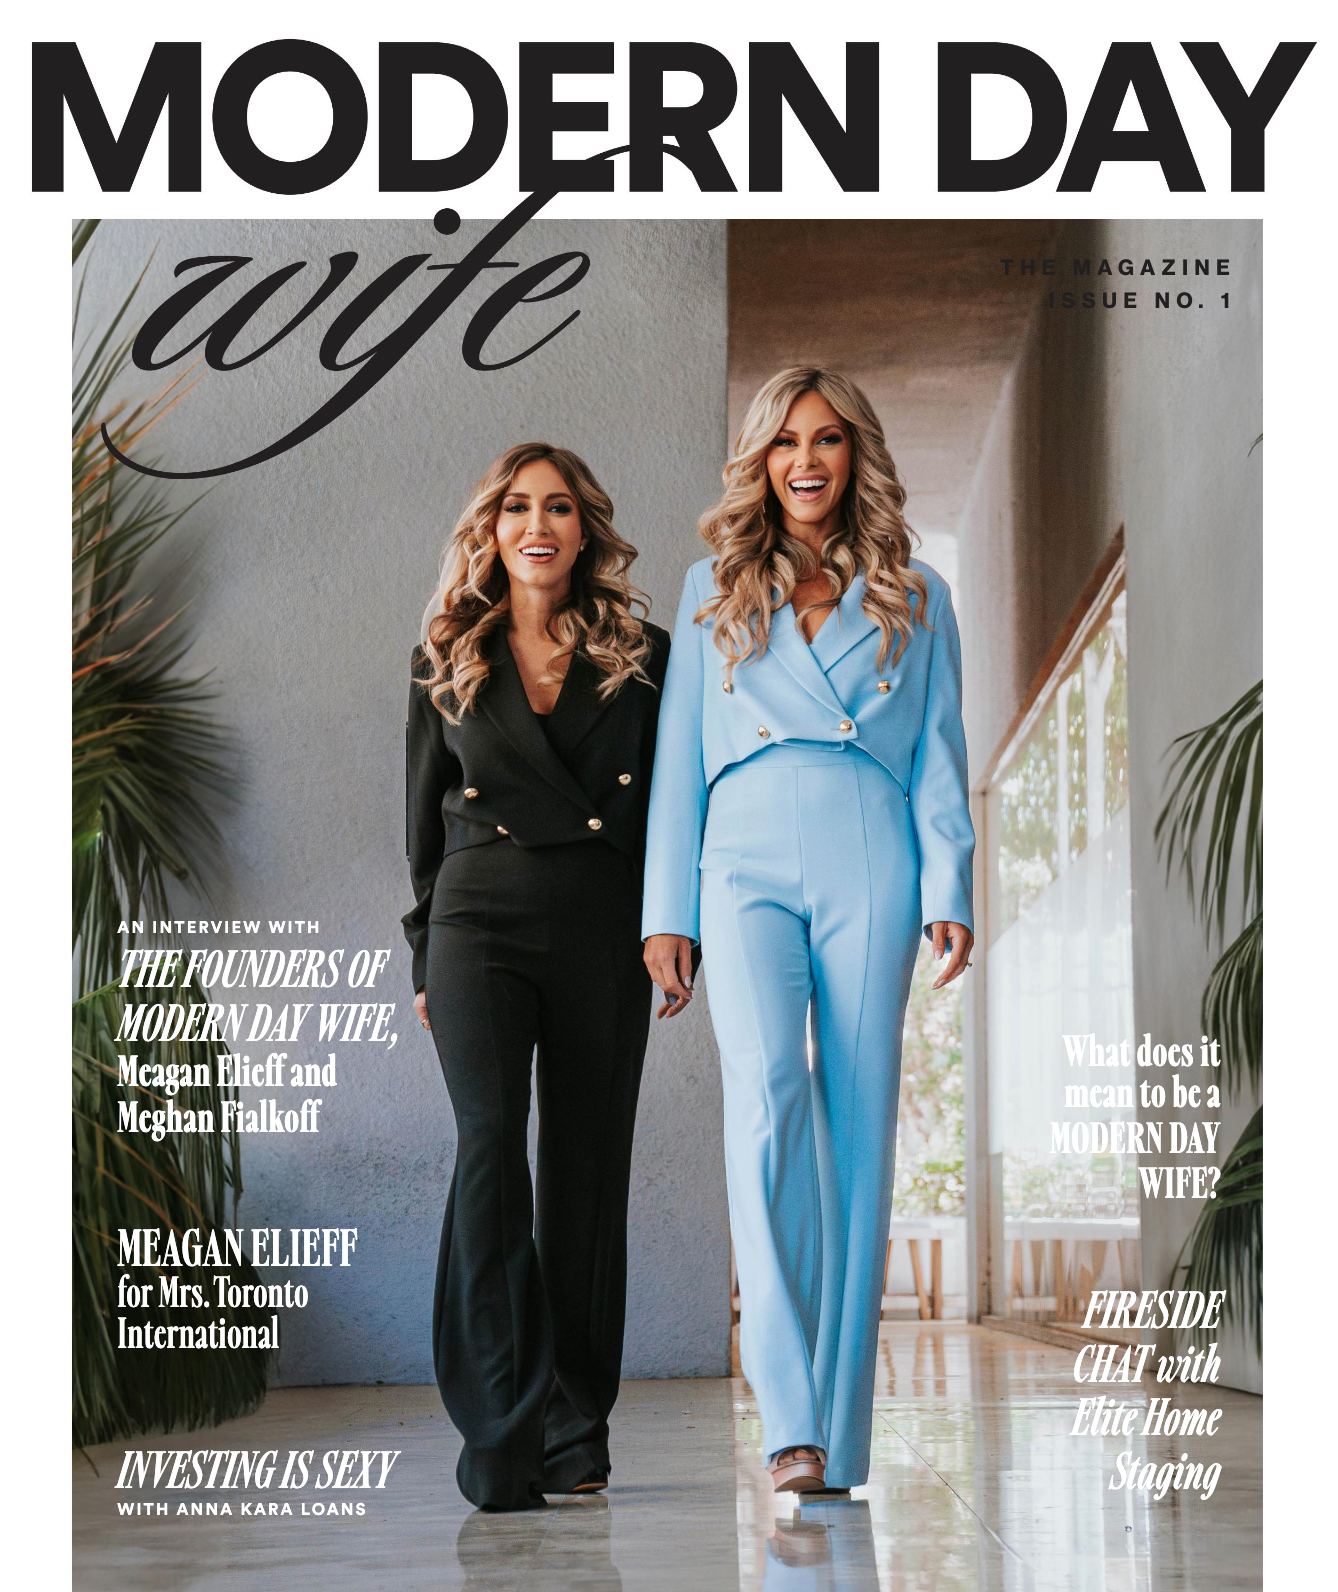 Modern Day Wife, The Magazine Issue No.1